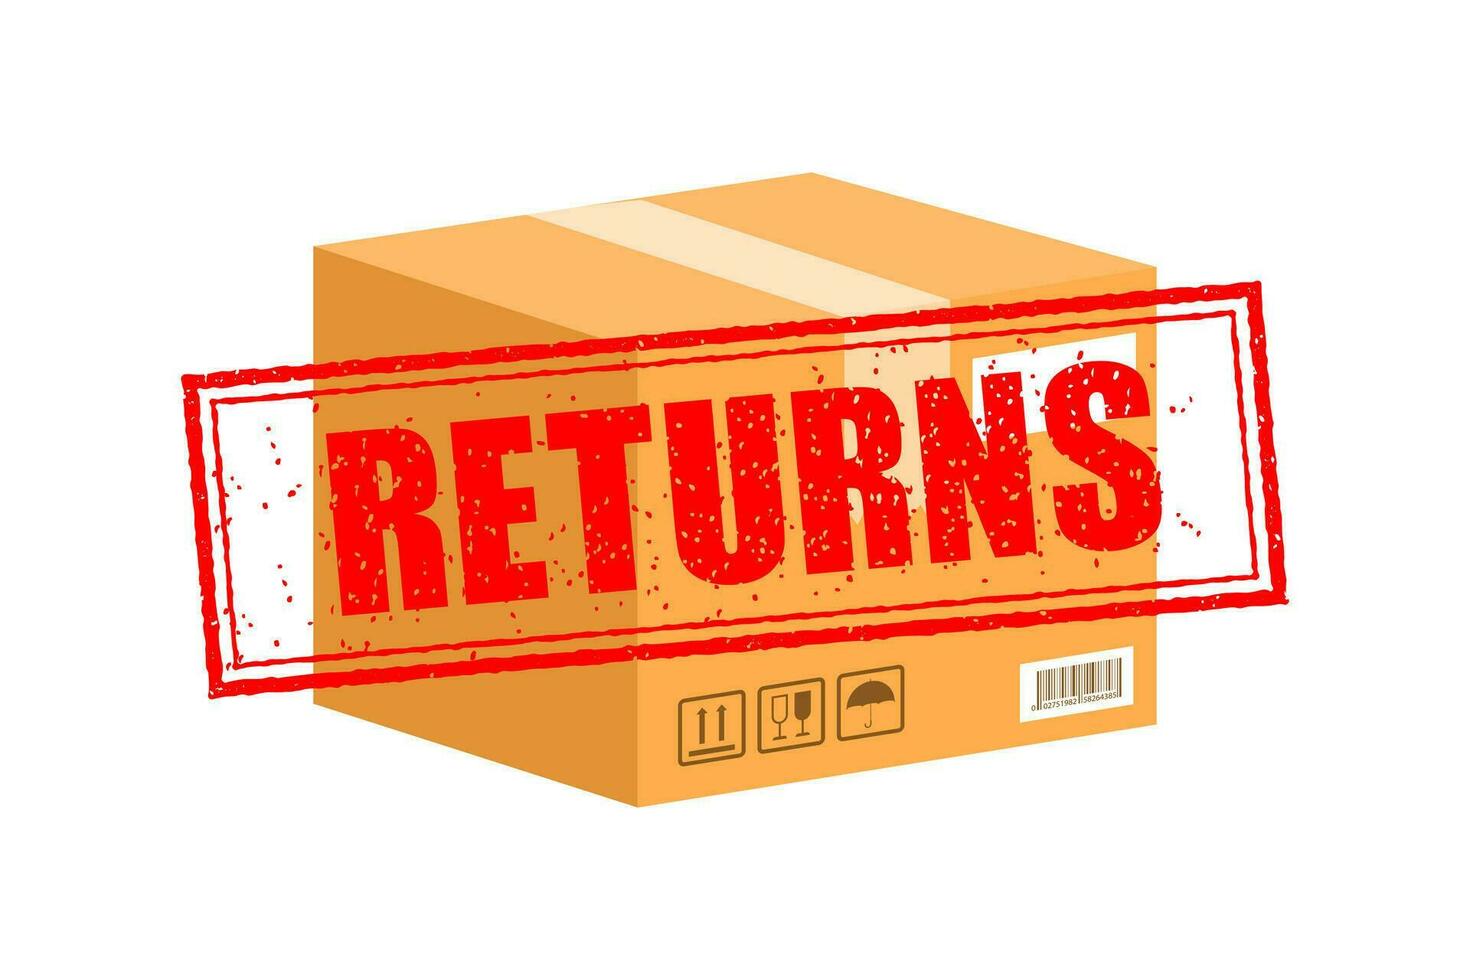 Returns box, great design for any purposes. Vector concept. Courier service delivery